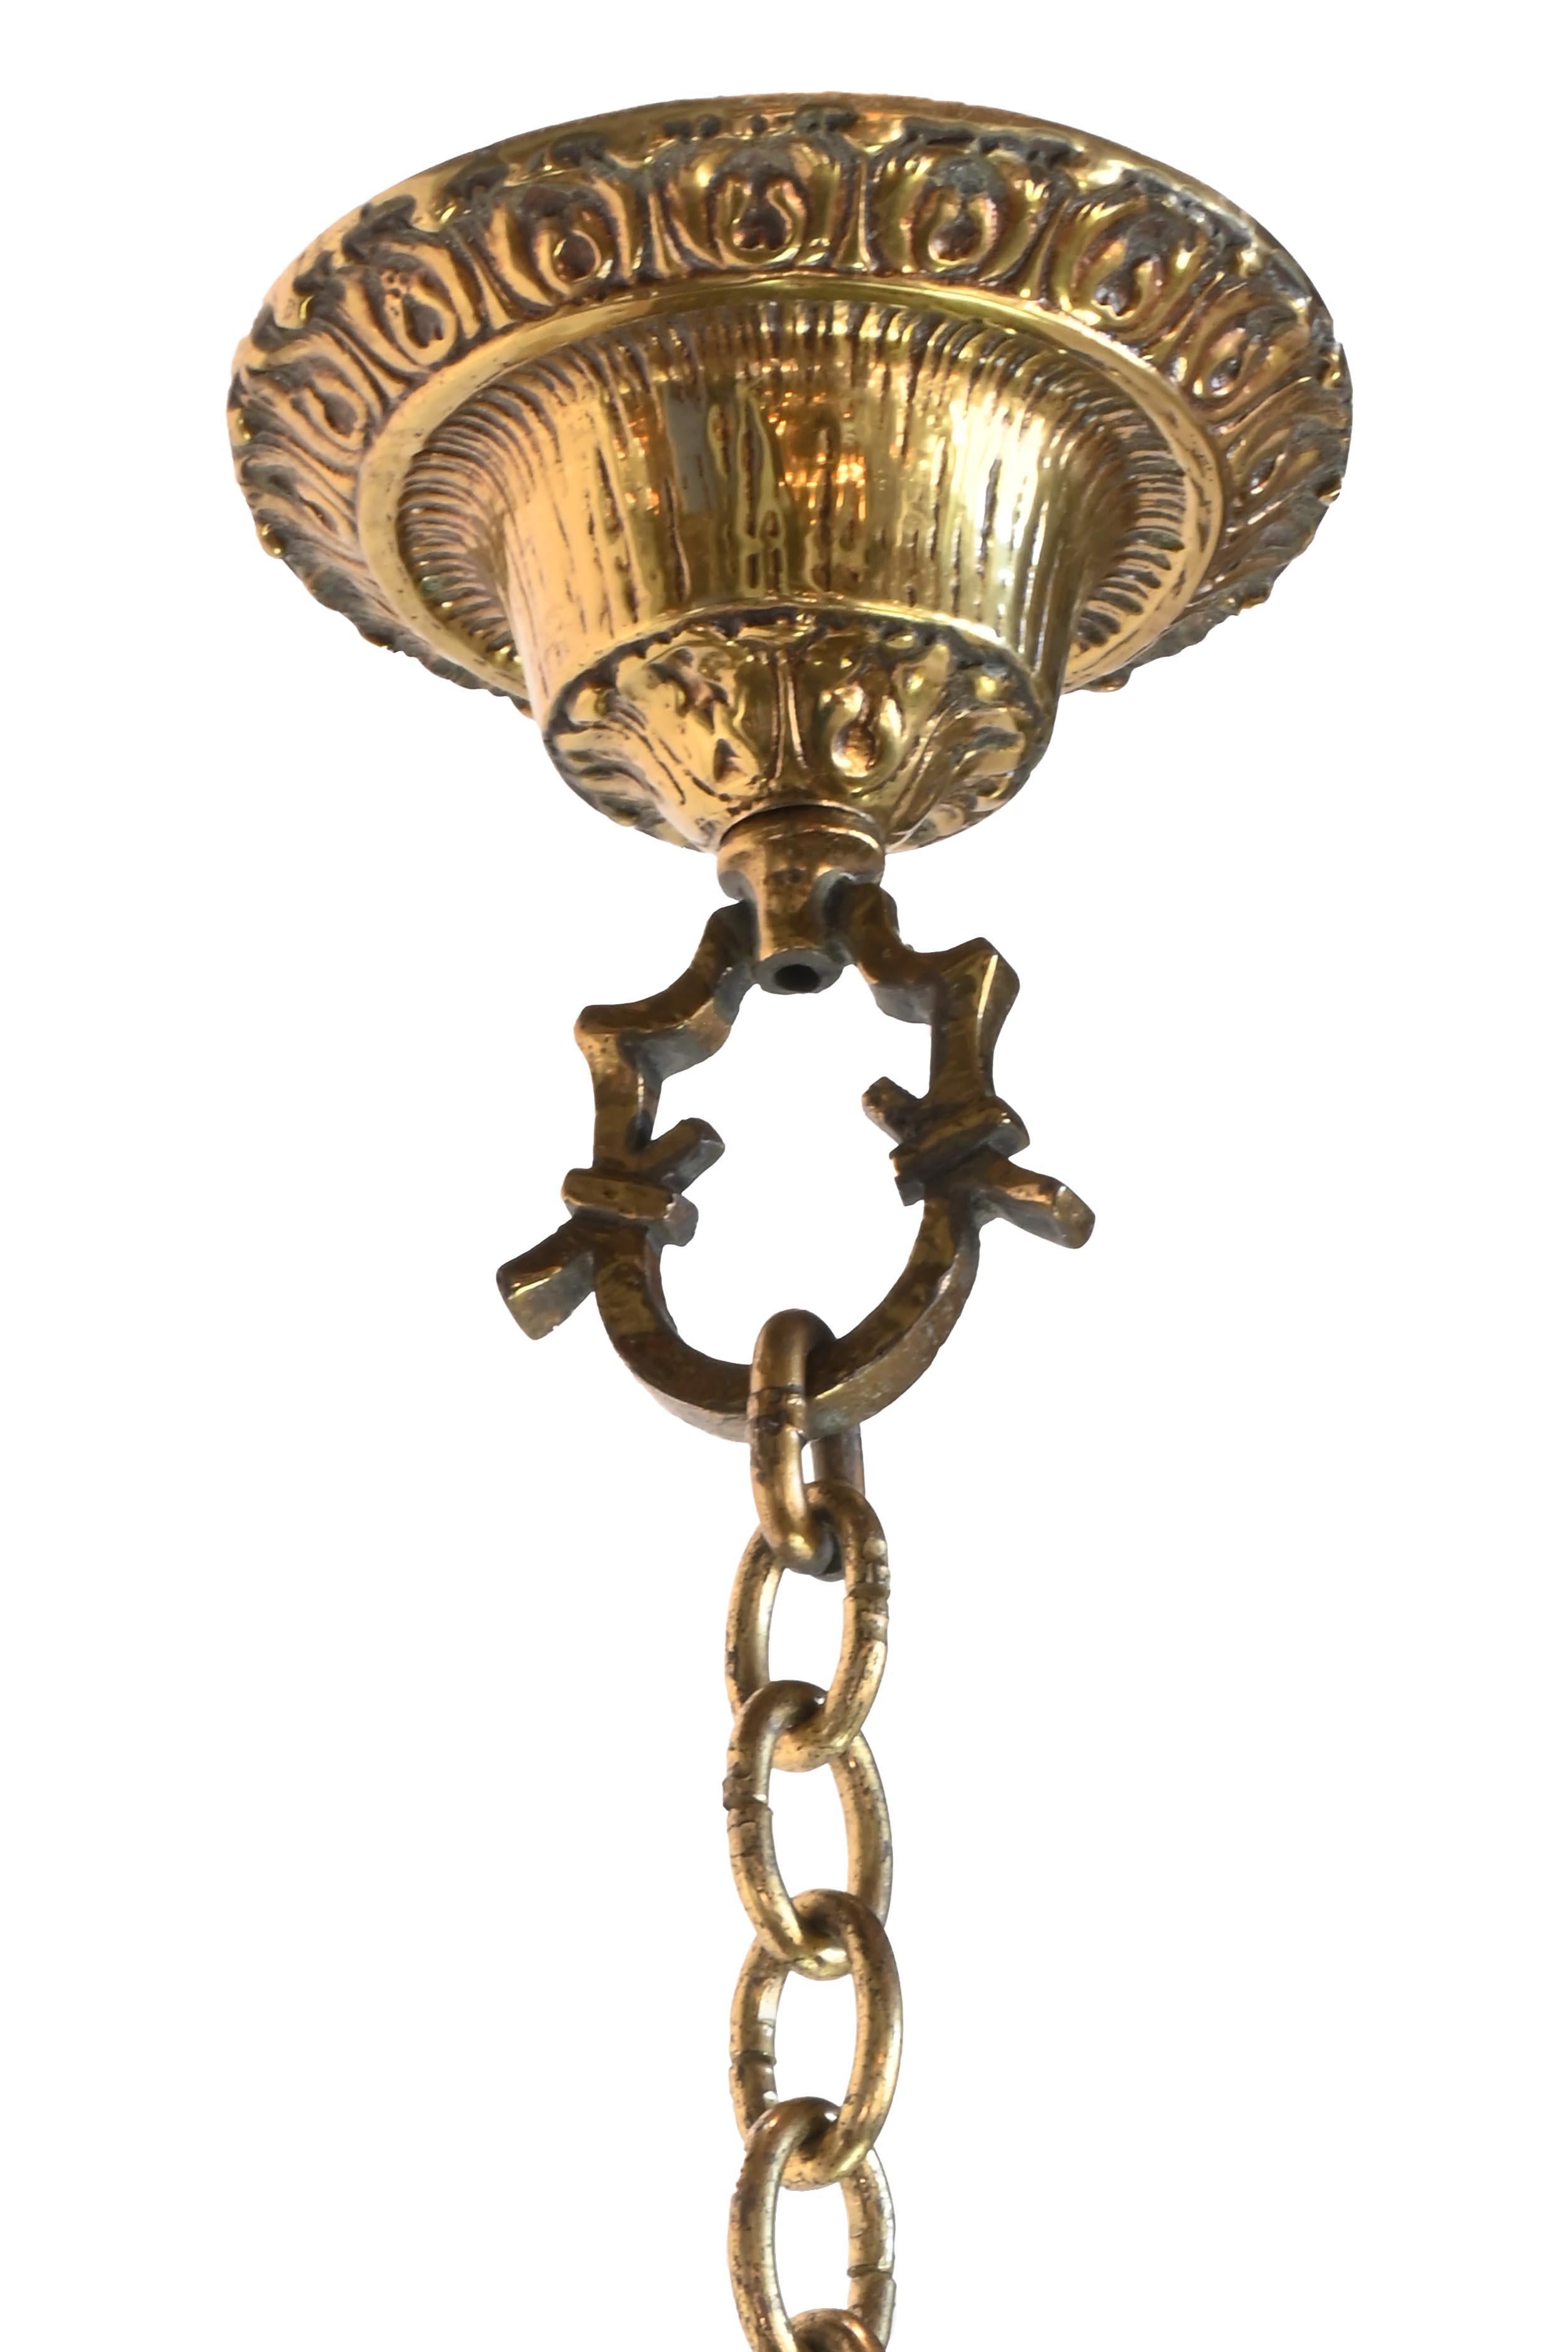 Details make Larger Scale Spanish Baroque or even Tudor Revival Brass Chandelier stand out. Created in the styling of Oscar Bach castings and plenty of illumination will be giving from this fixture. 

AA# 61065
Circa: 1930’s
Condition: Age